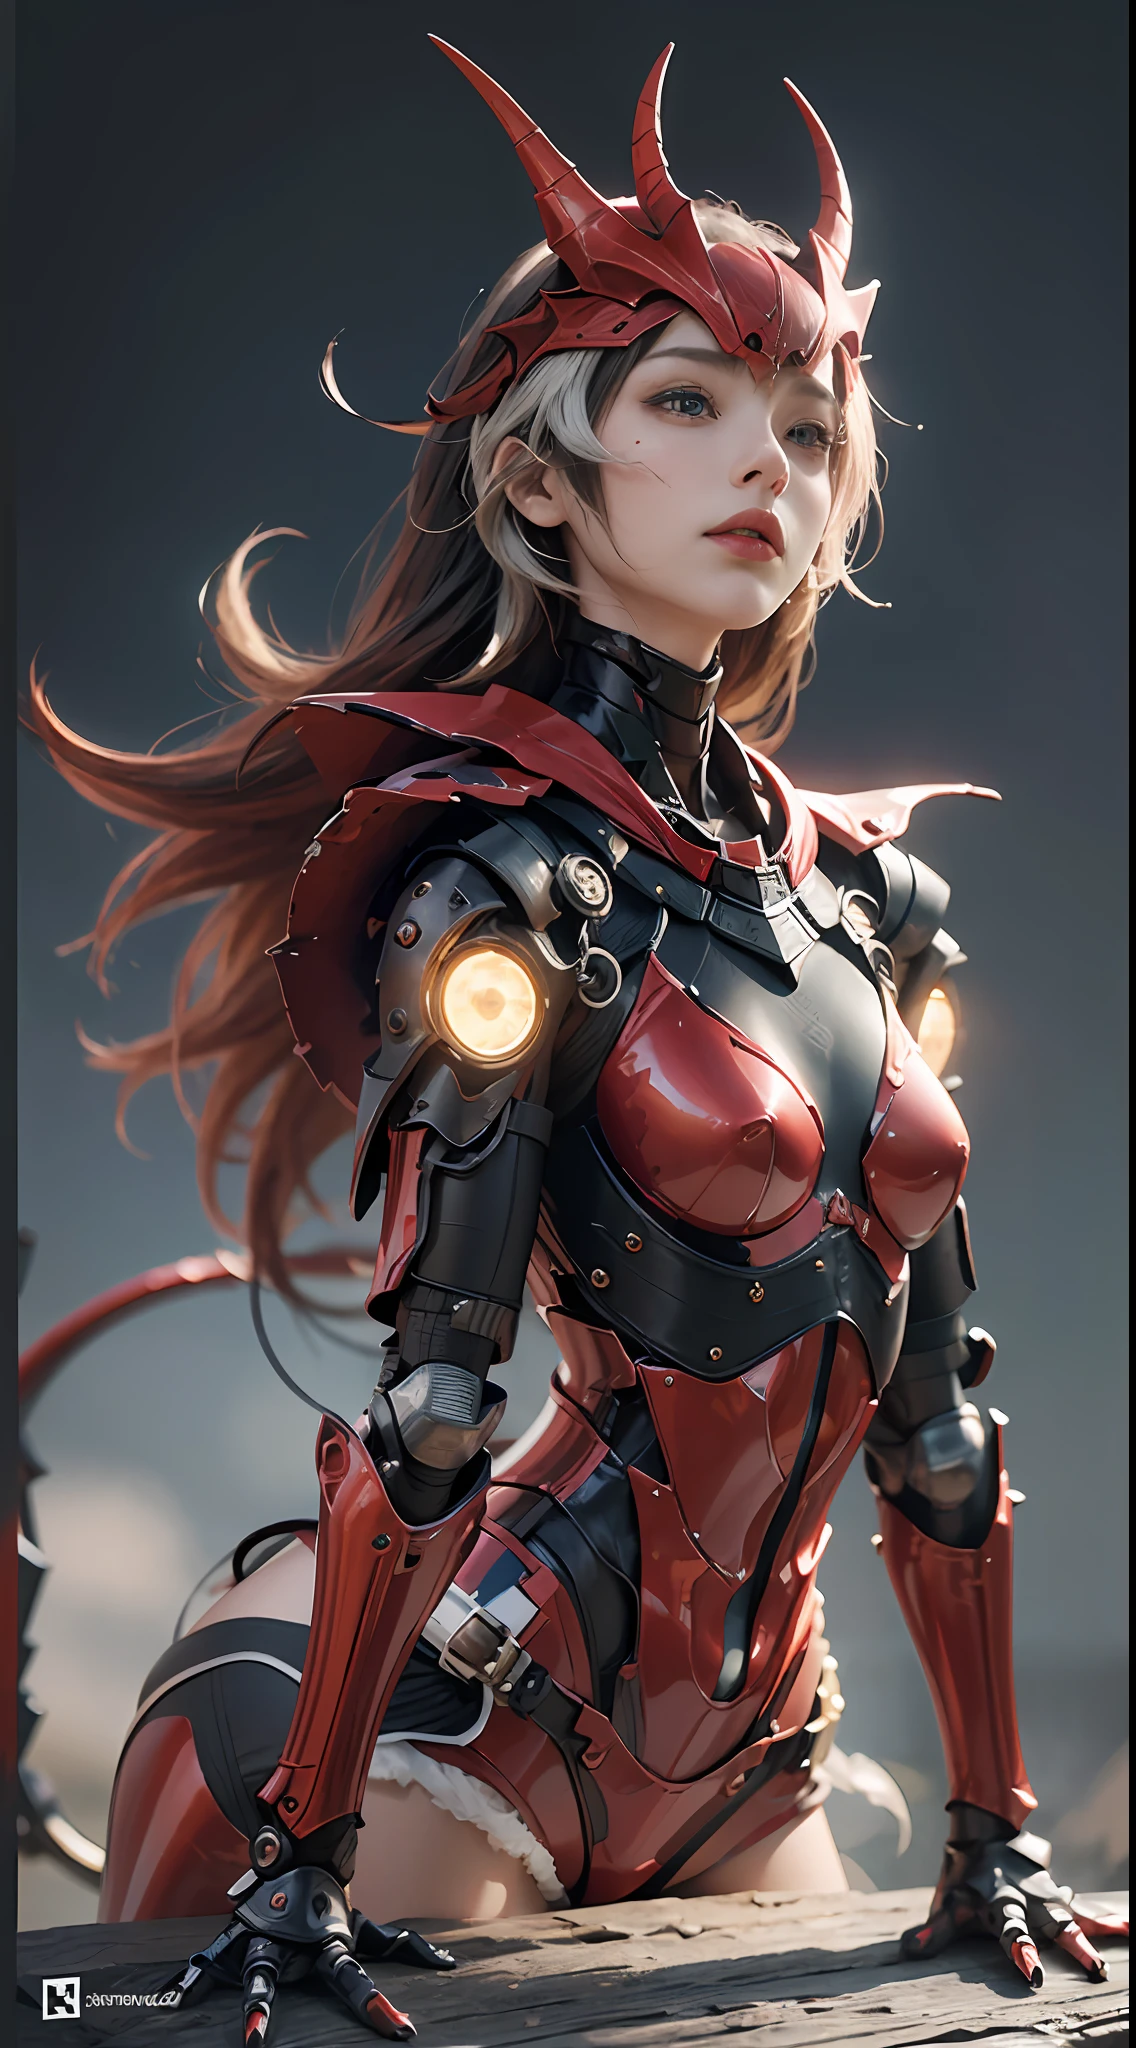 （tmasterpiece，），（best qualtiy），photorealestic，Realistis，ultra - detailed，s the perfect face，Perfect body，1 rapariga，beuaty girl，Girl in red armor，Dinosaur bone mechanical armor，exoskeleton,Change posture,dynamicposes，cool-pose，Full body photo，super wide shot